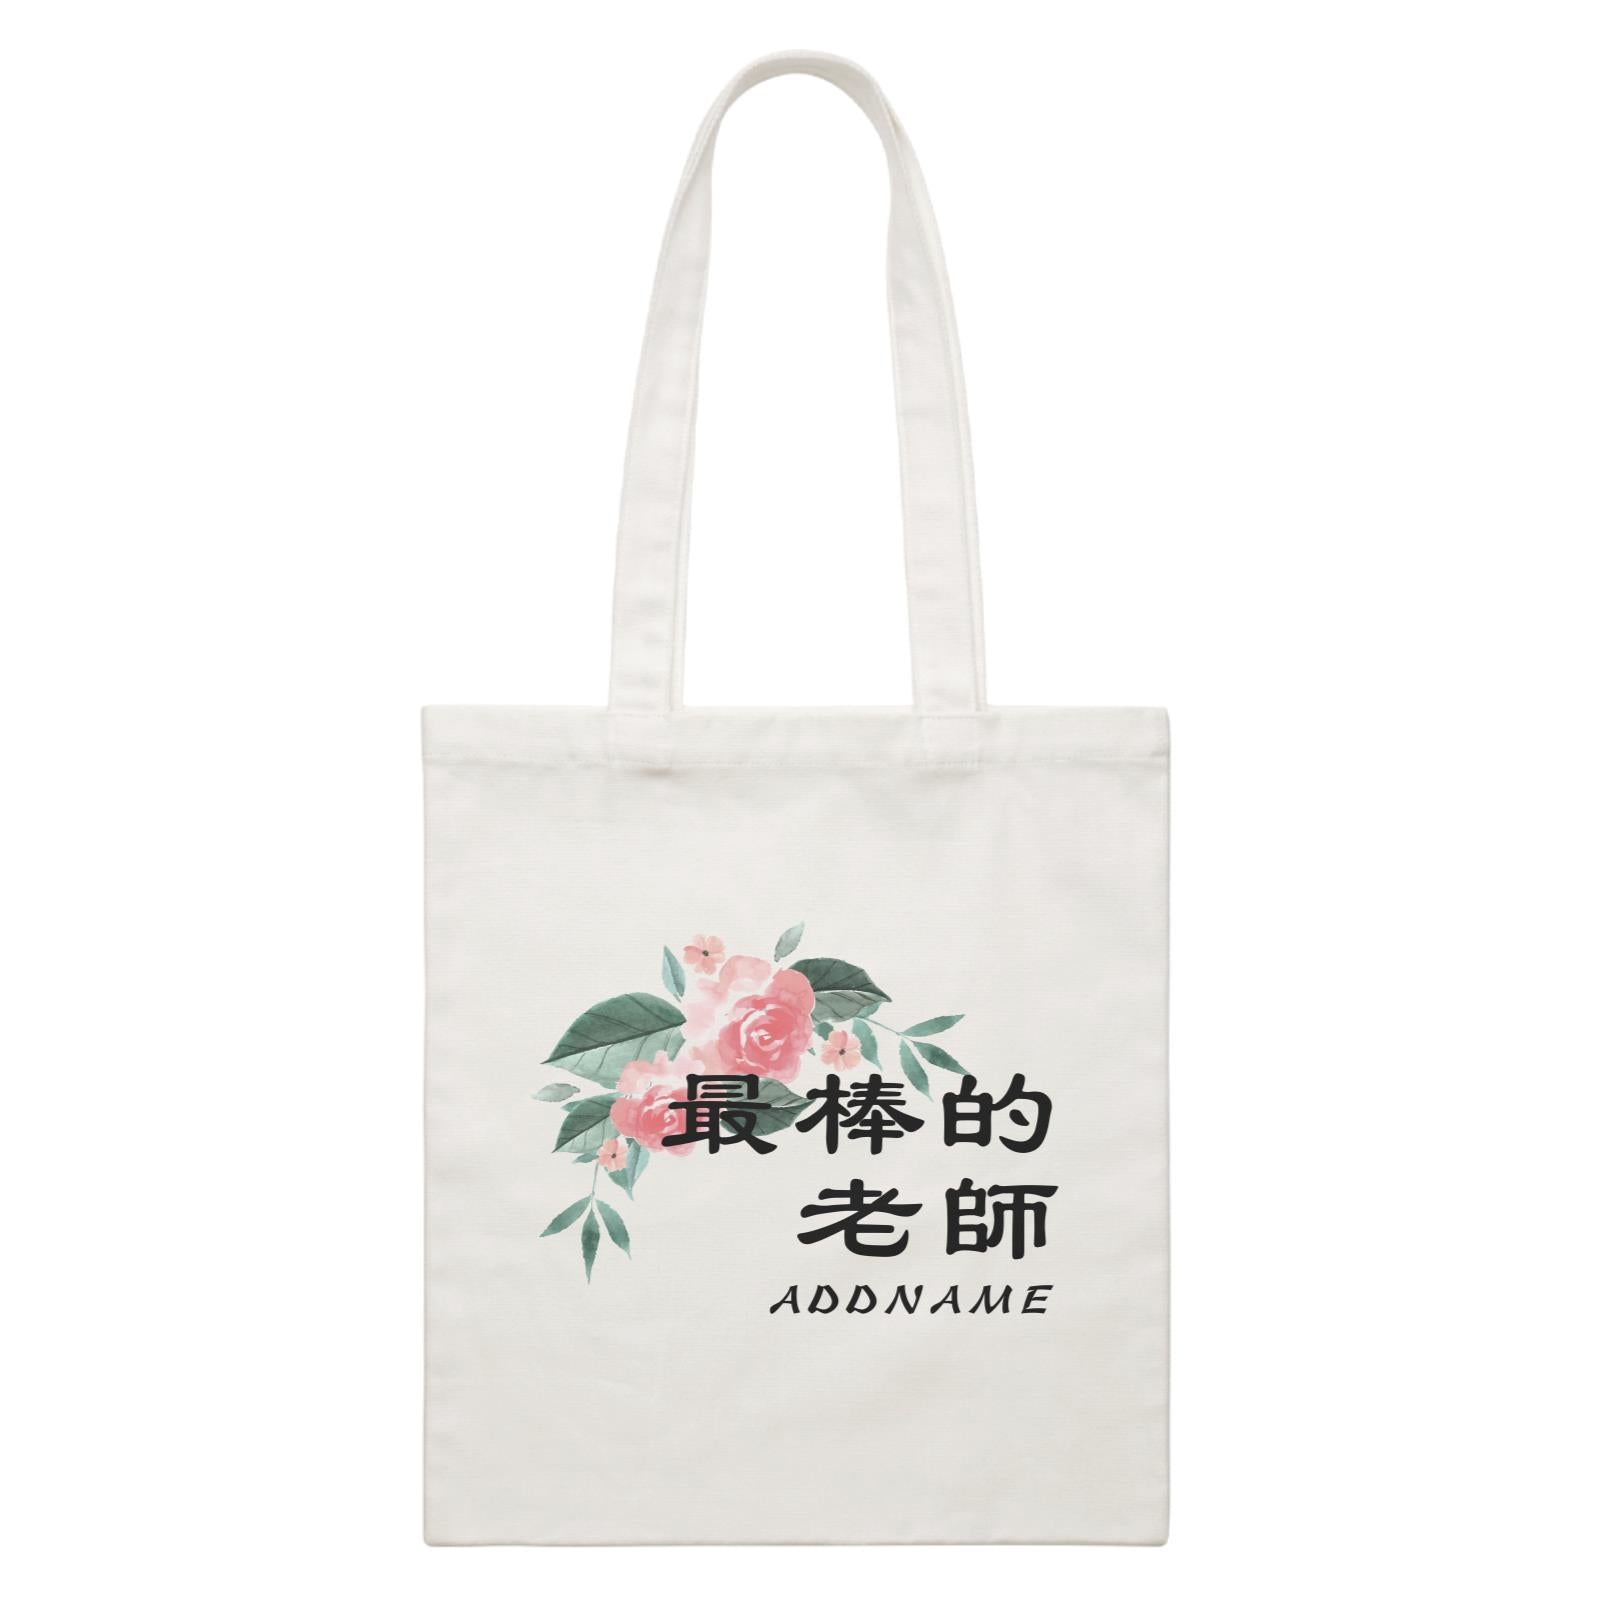 Watercolour Best Teacher Chinese Addname White Canvas Bag